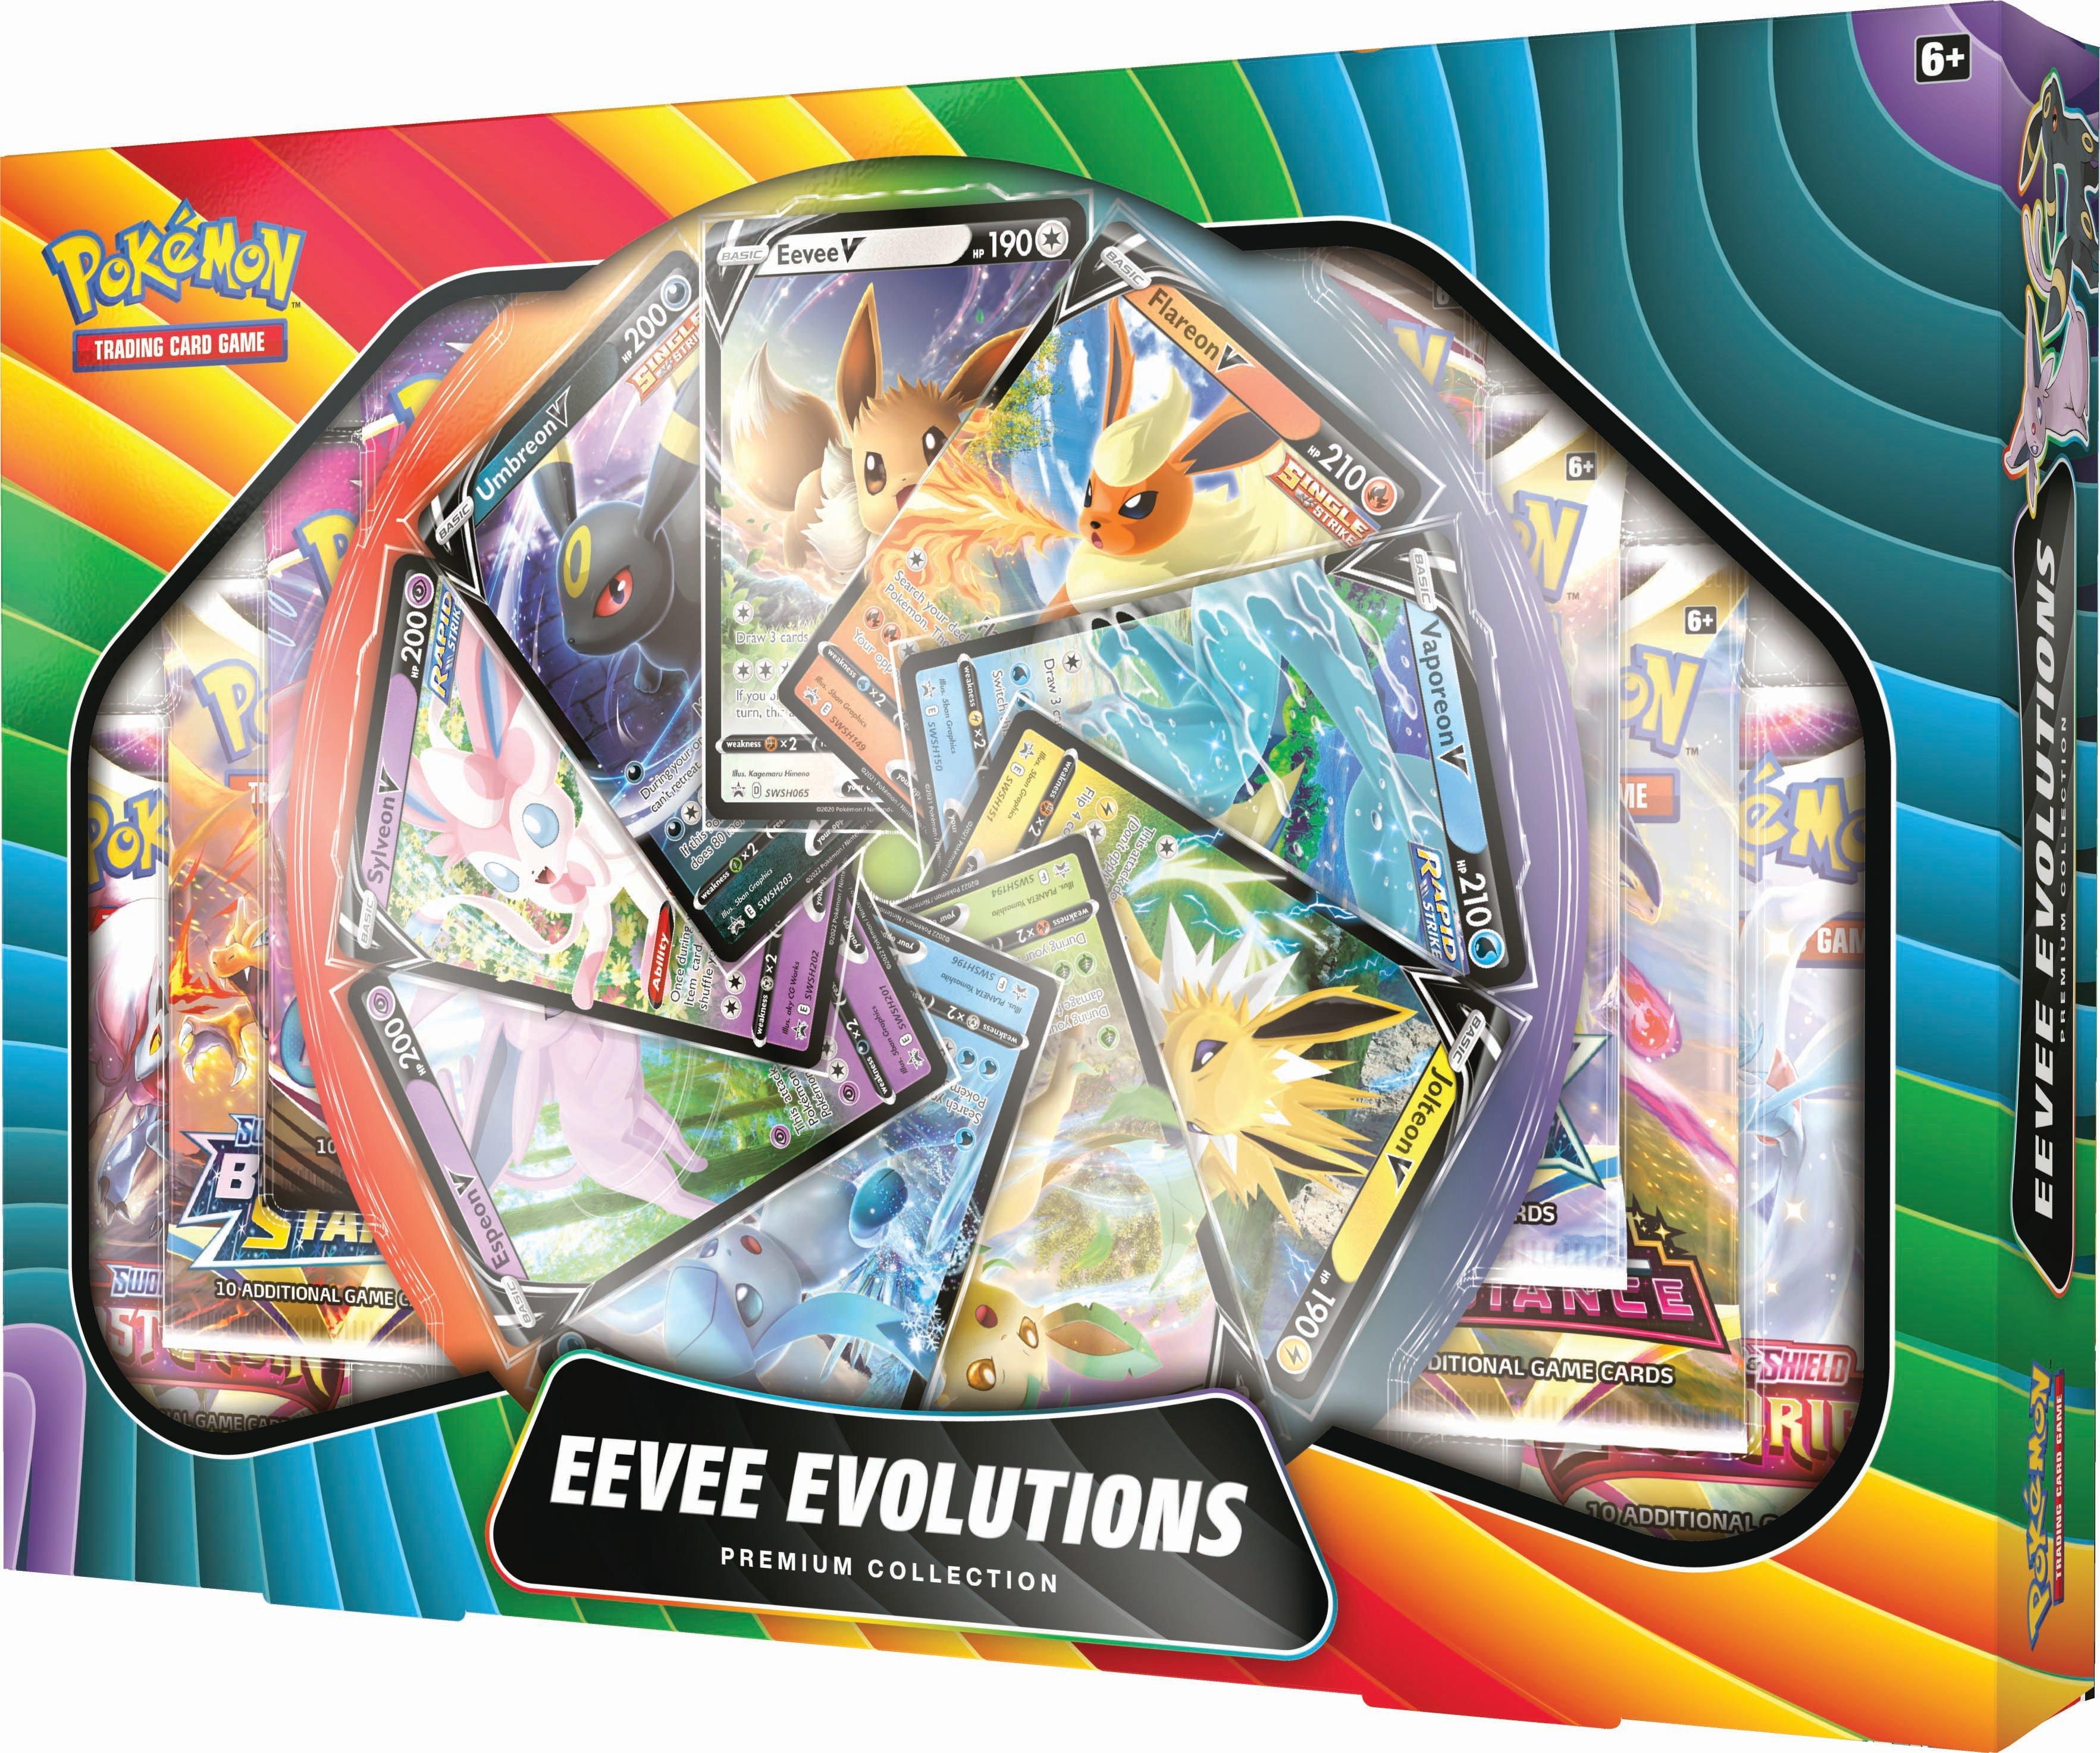 list item 12 of 14 Pokemon Trading Card Game: Eevee V Premium Collection